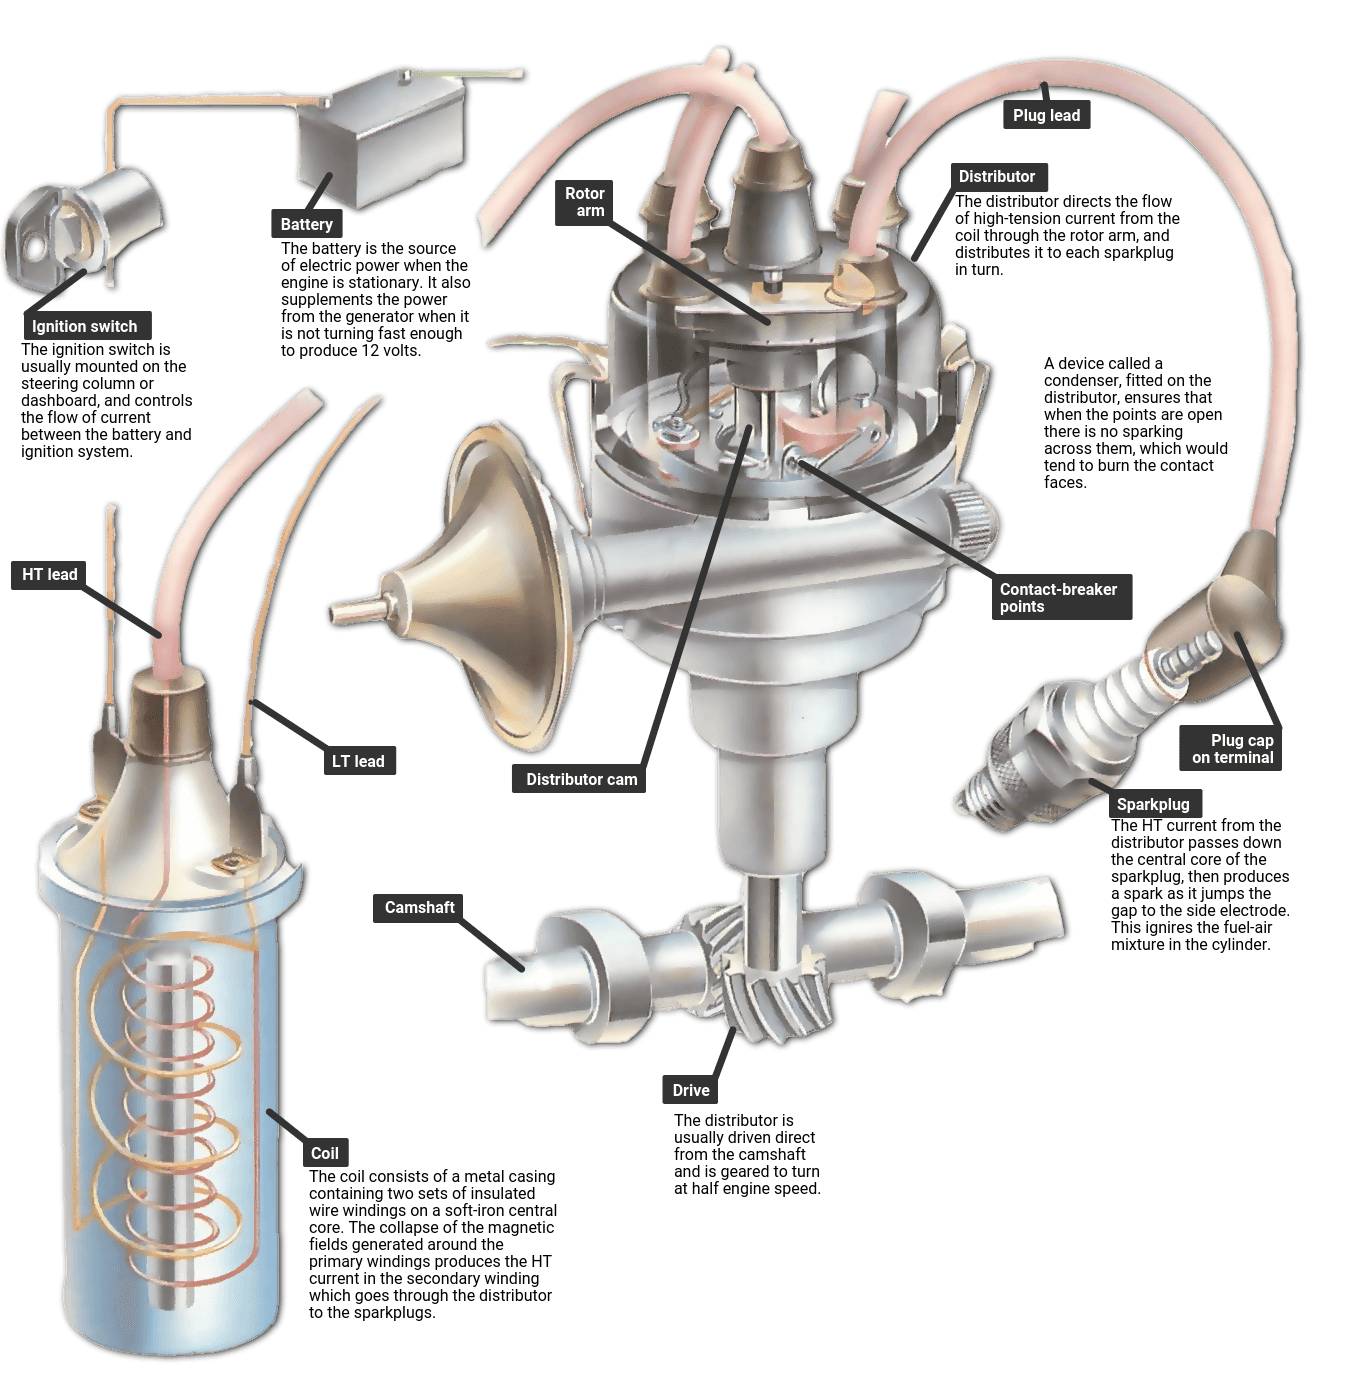 ignition system components